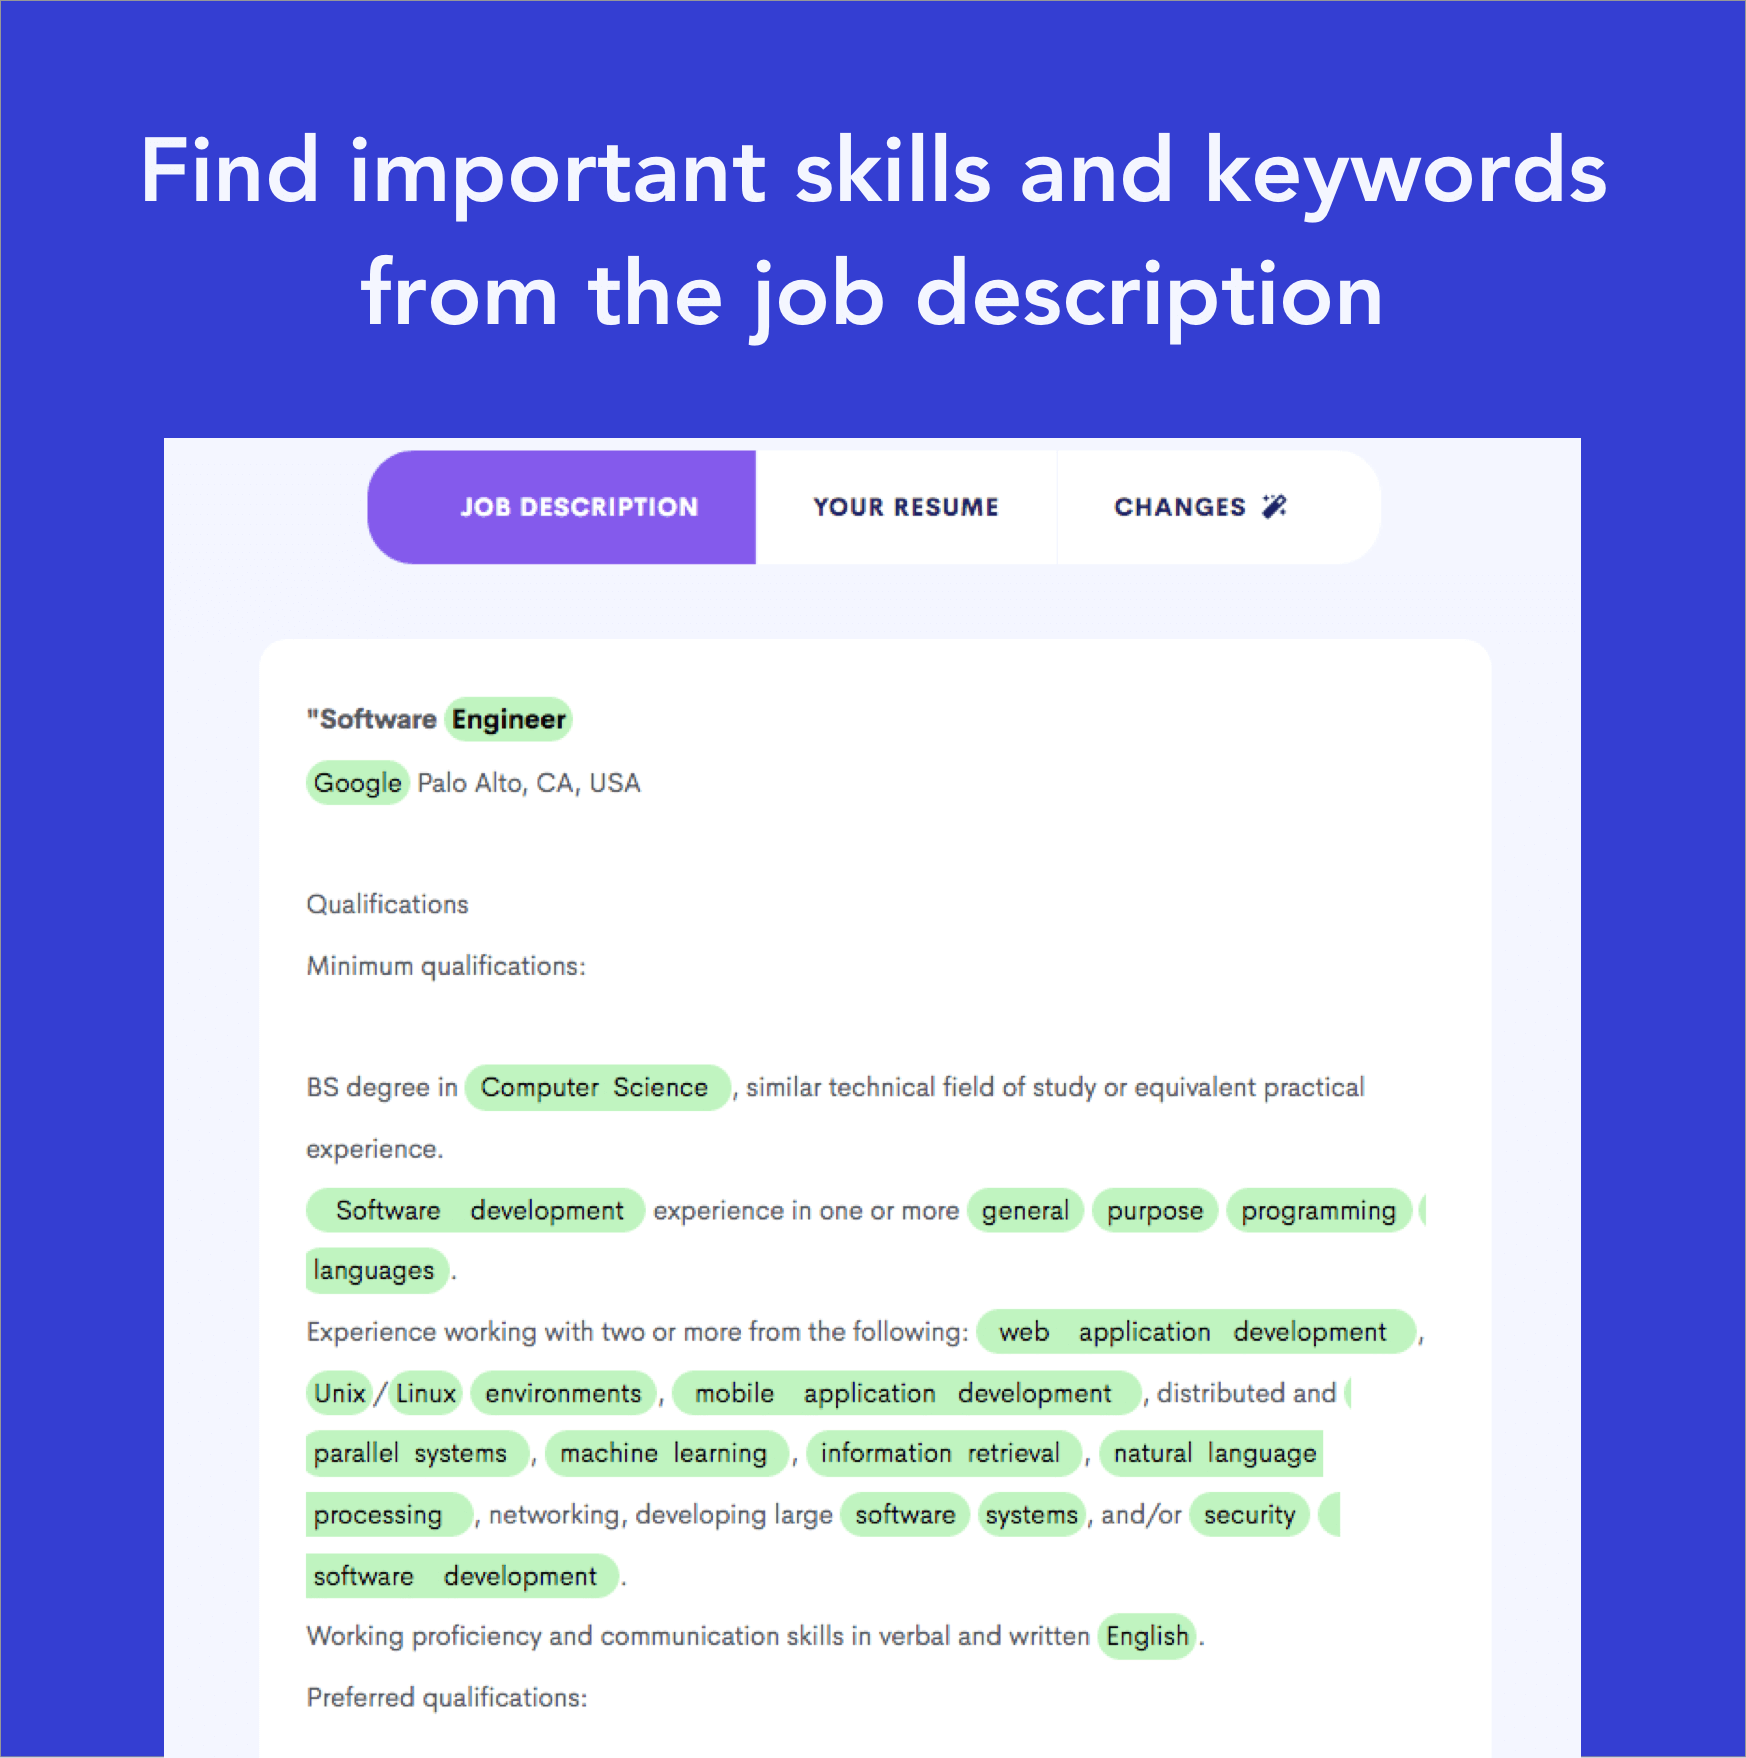 Tailor your resume with relevant keywords - Digital Marketing Analyst Resume